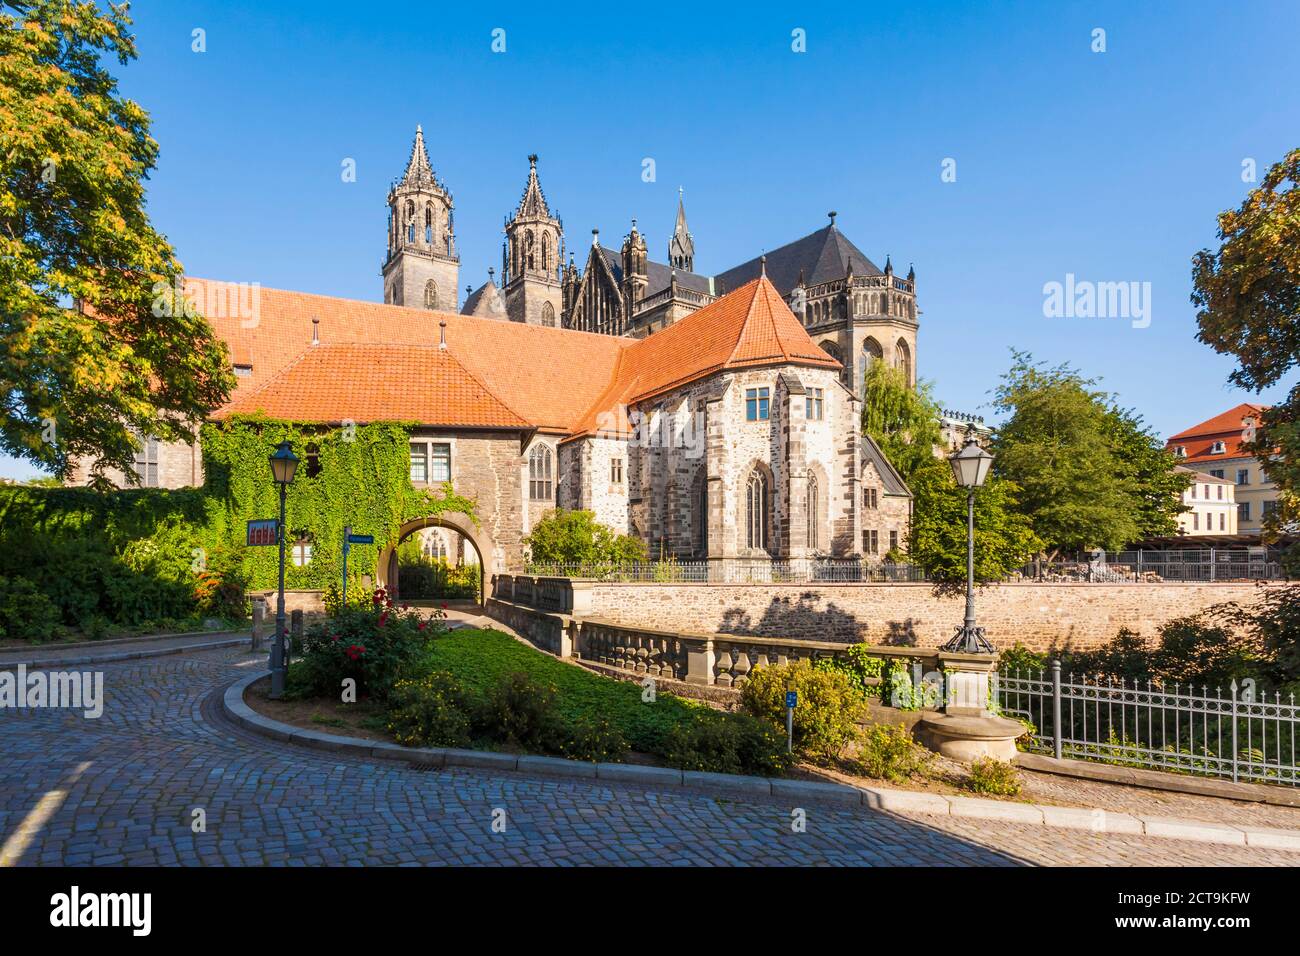 Germany, Saxony-Anhalt, Magdeburg, Fürstenwall and Cathedral of Magdeburg Stock Photo